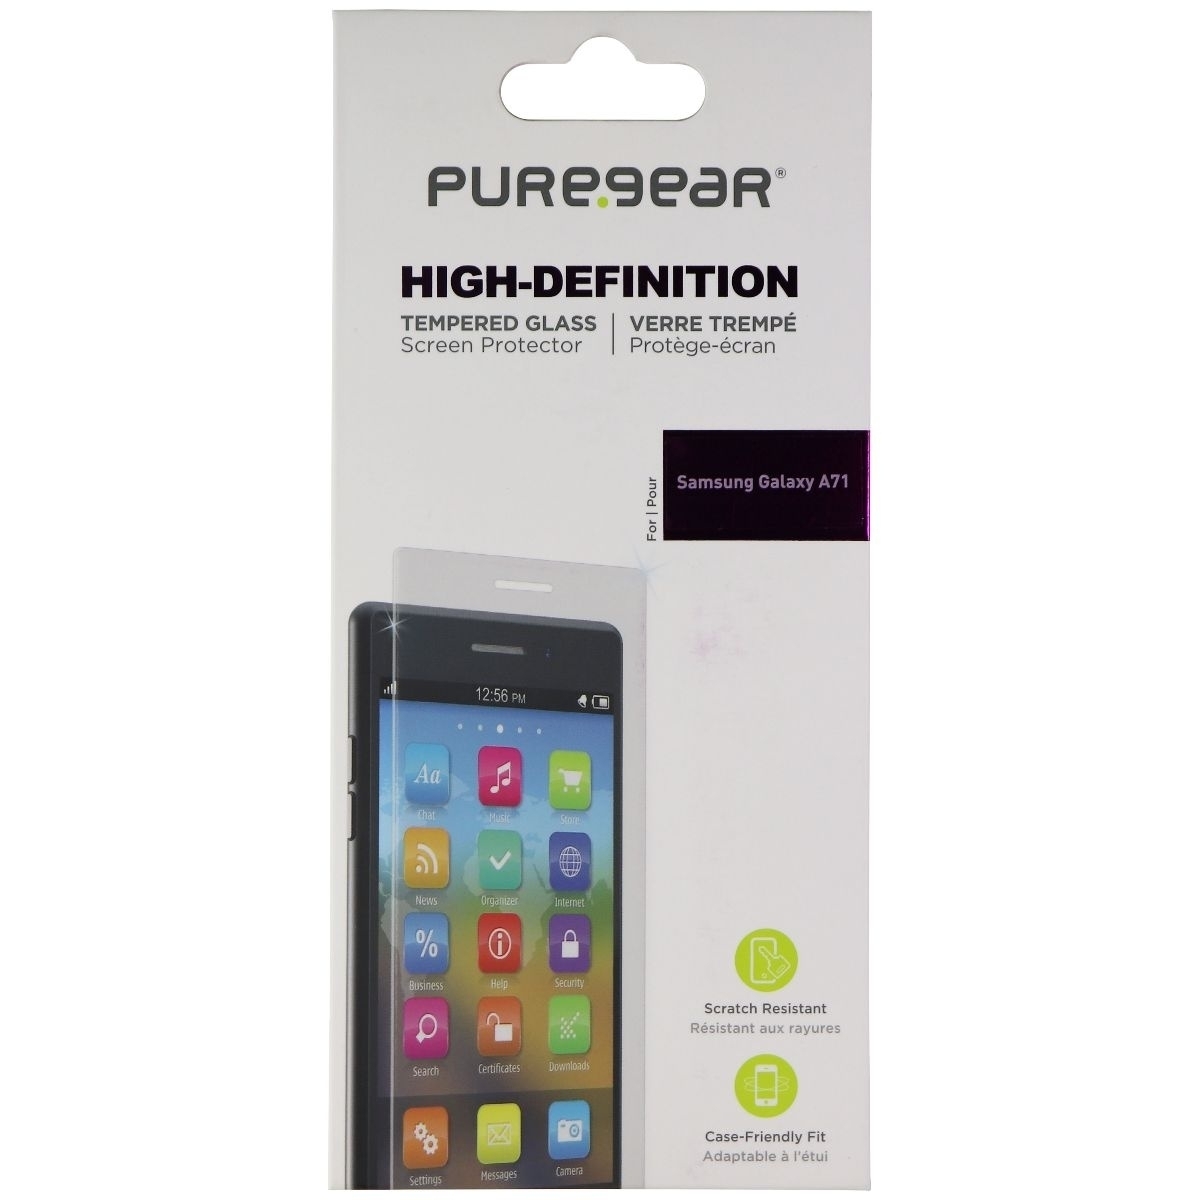 PureGear High-Definition Tempered Glass Screen Protector For Samsung Galaxy A71